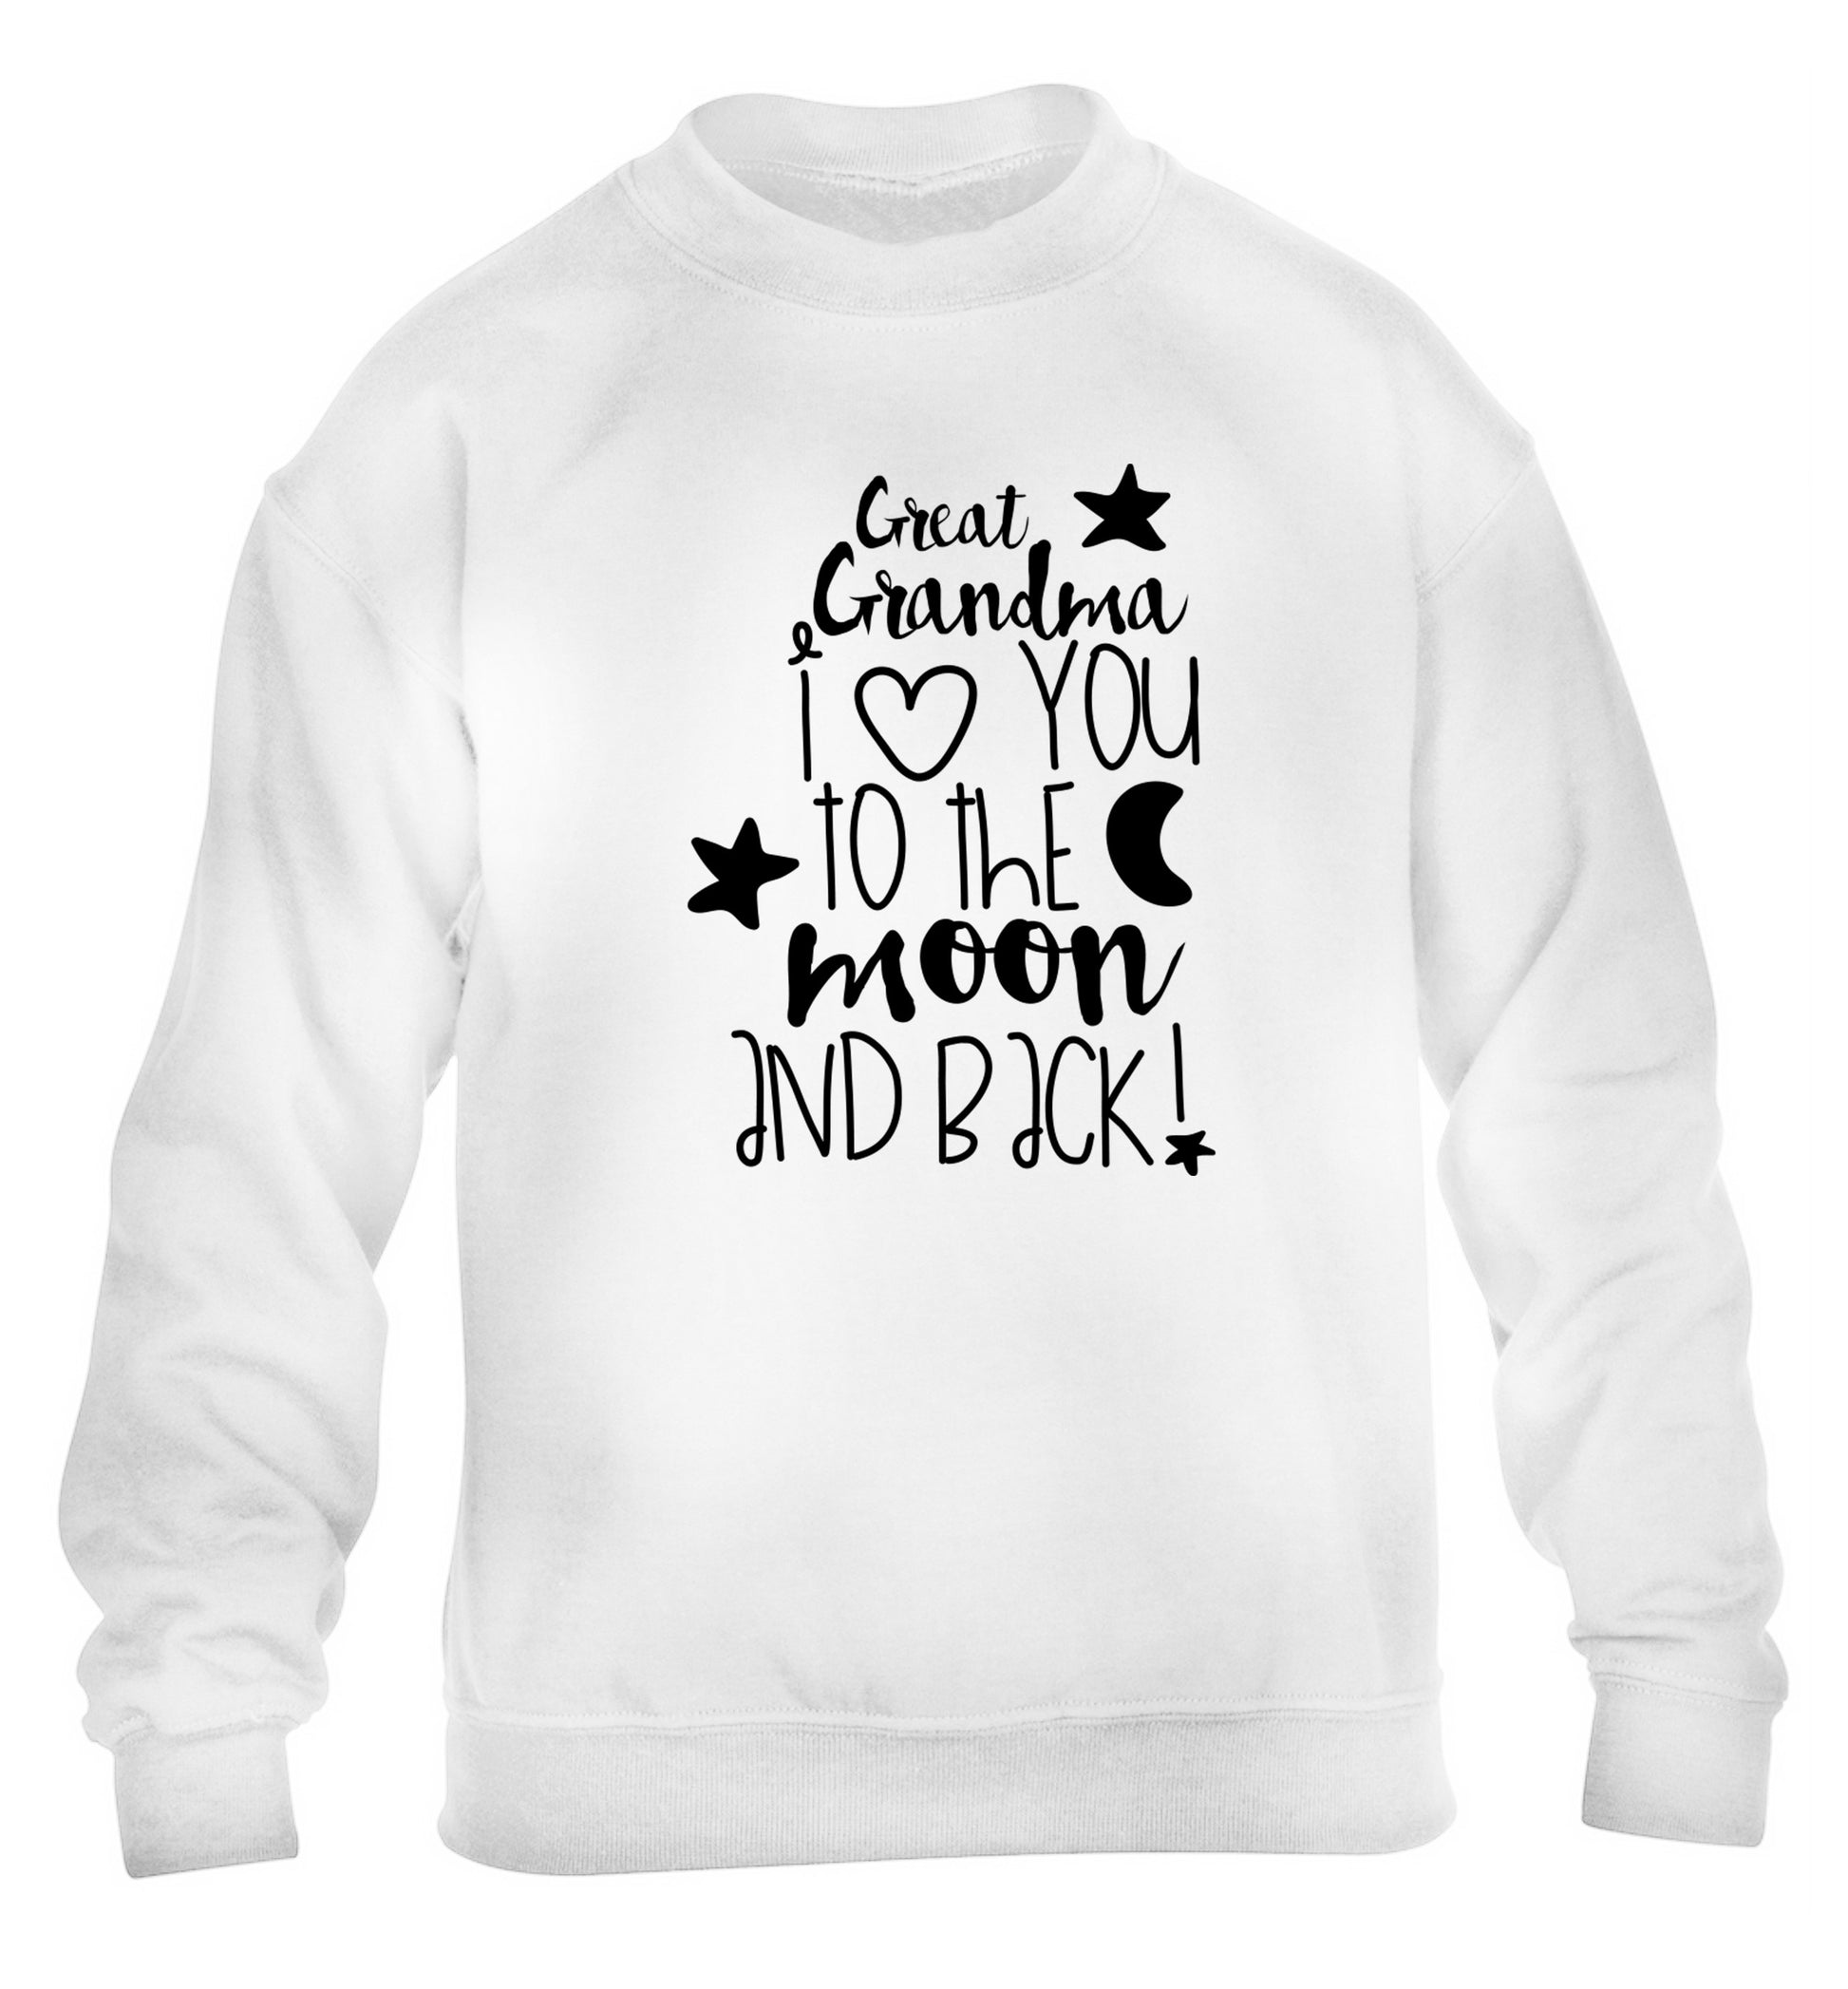 Great Grandma I love you to the moon and back children's white  sweater 12-14 Years